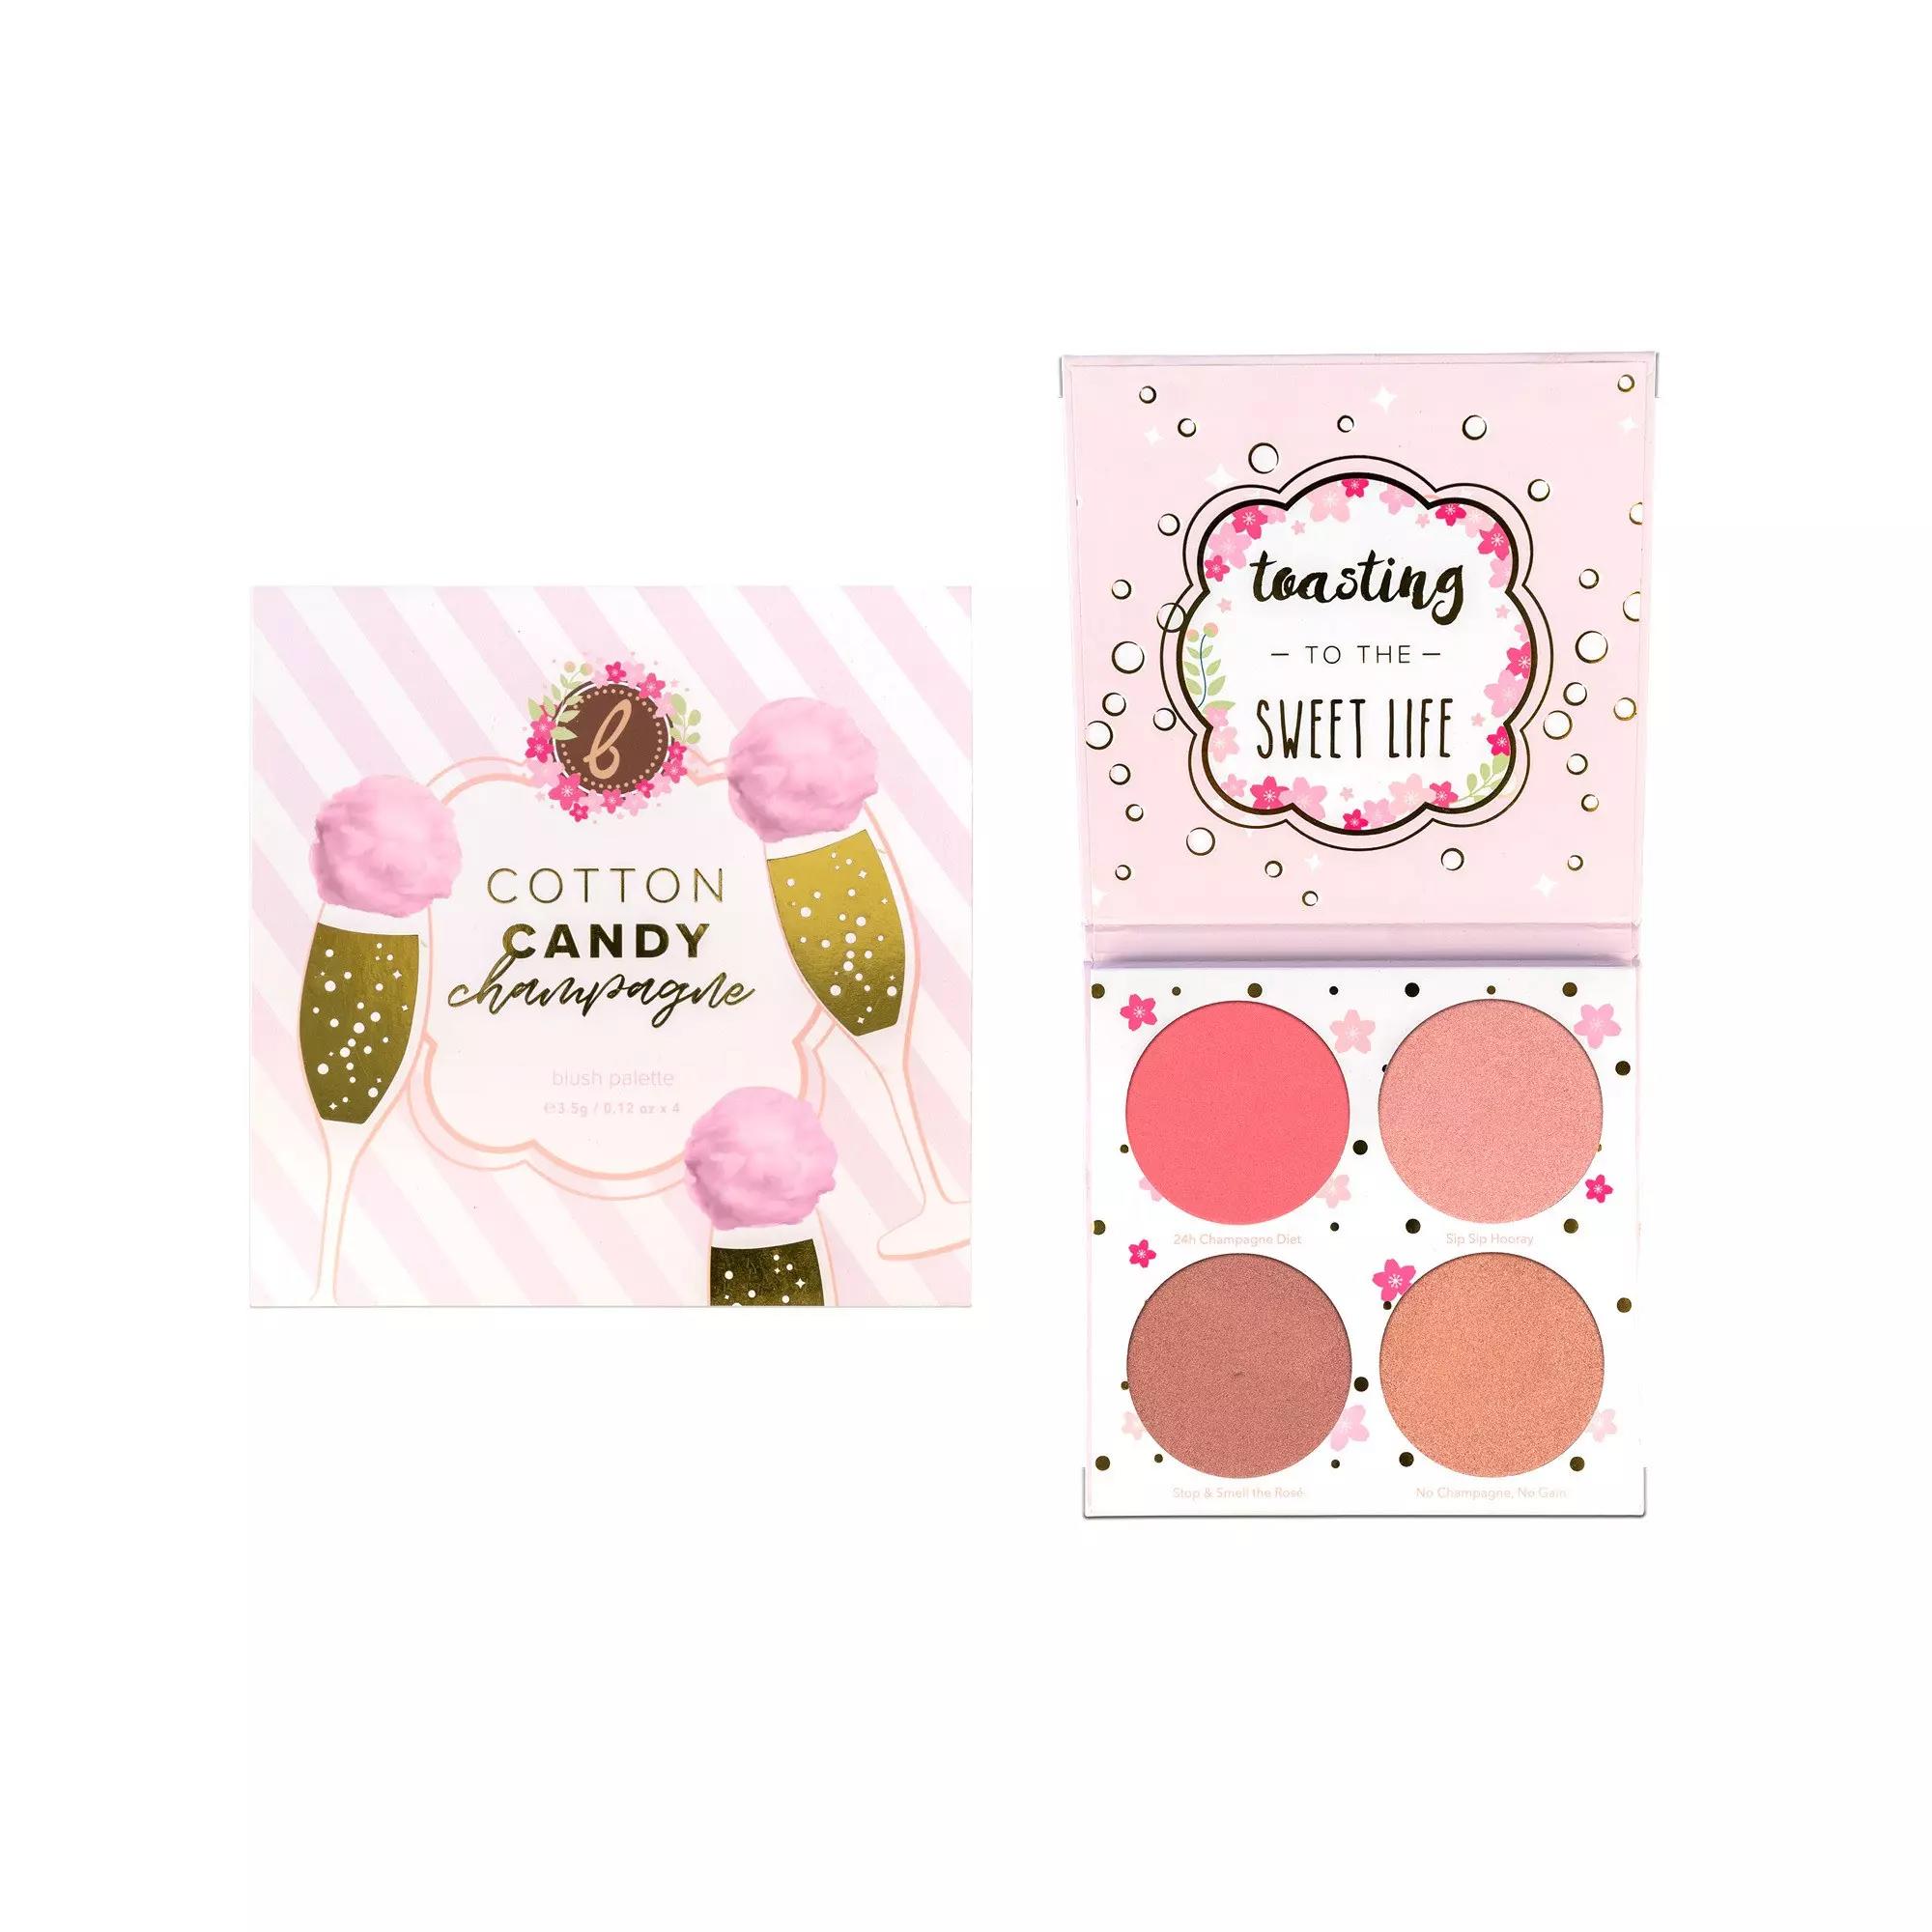 2nd Chance Beauty Bakerie Cotton Candy Champagne Blush Palette